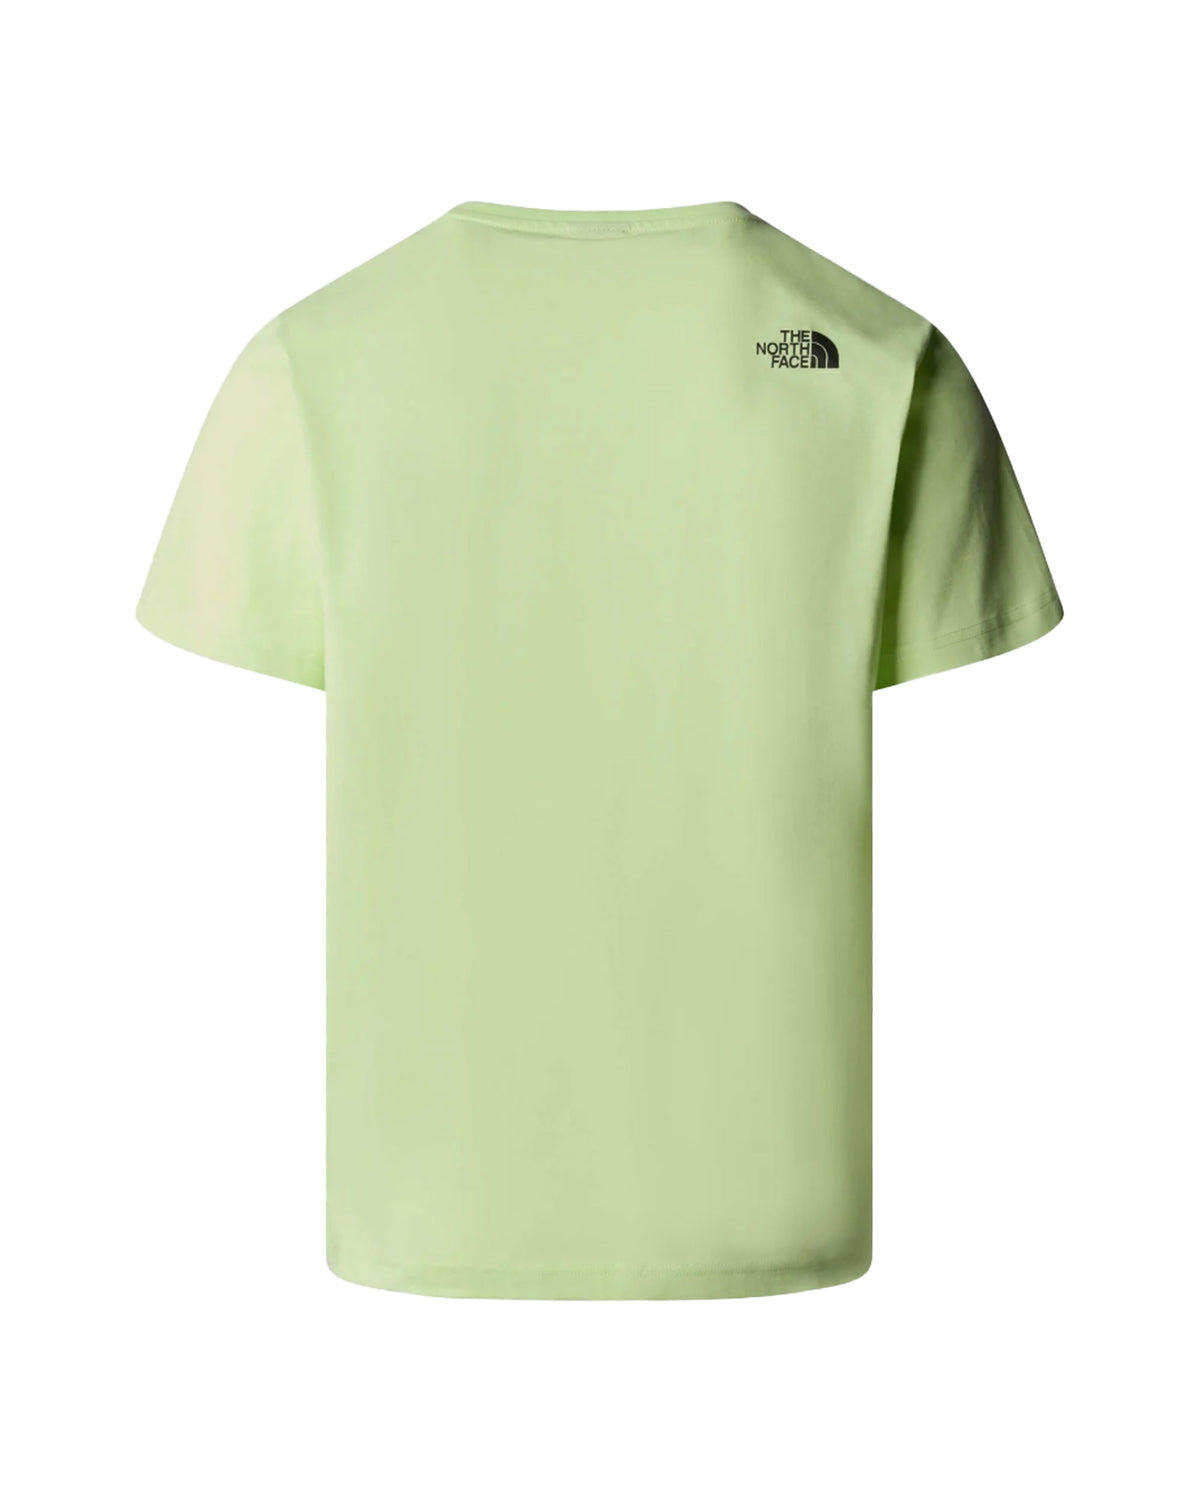 Man Tee The North Face Fine Green